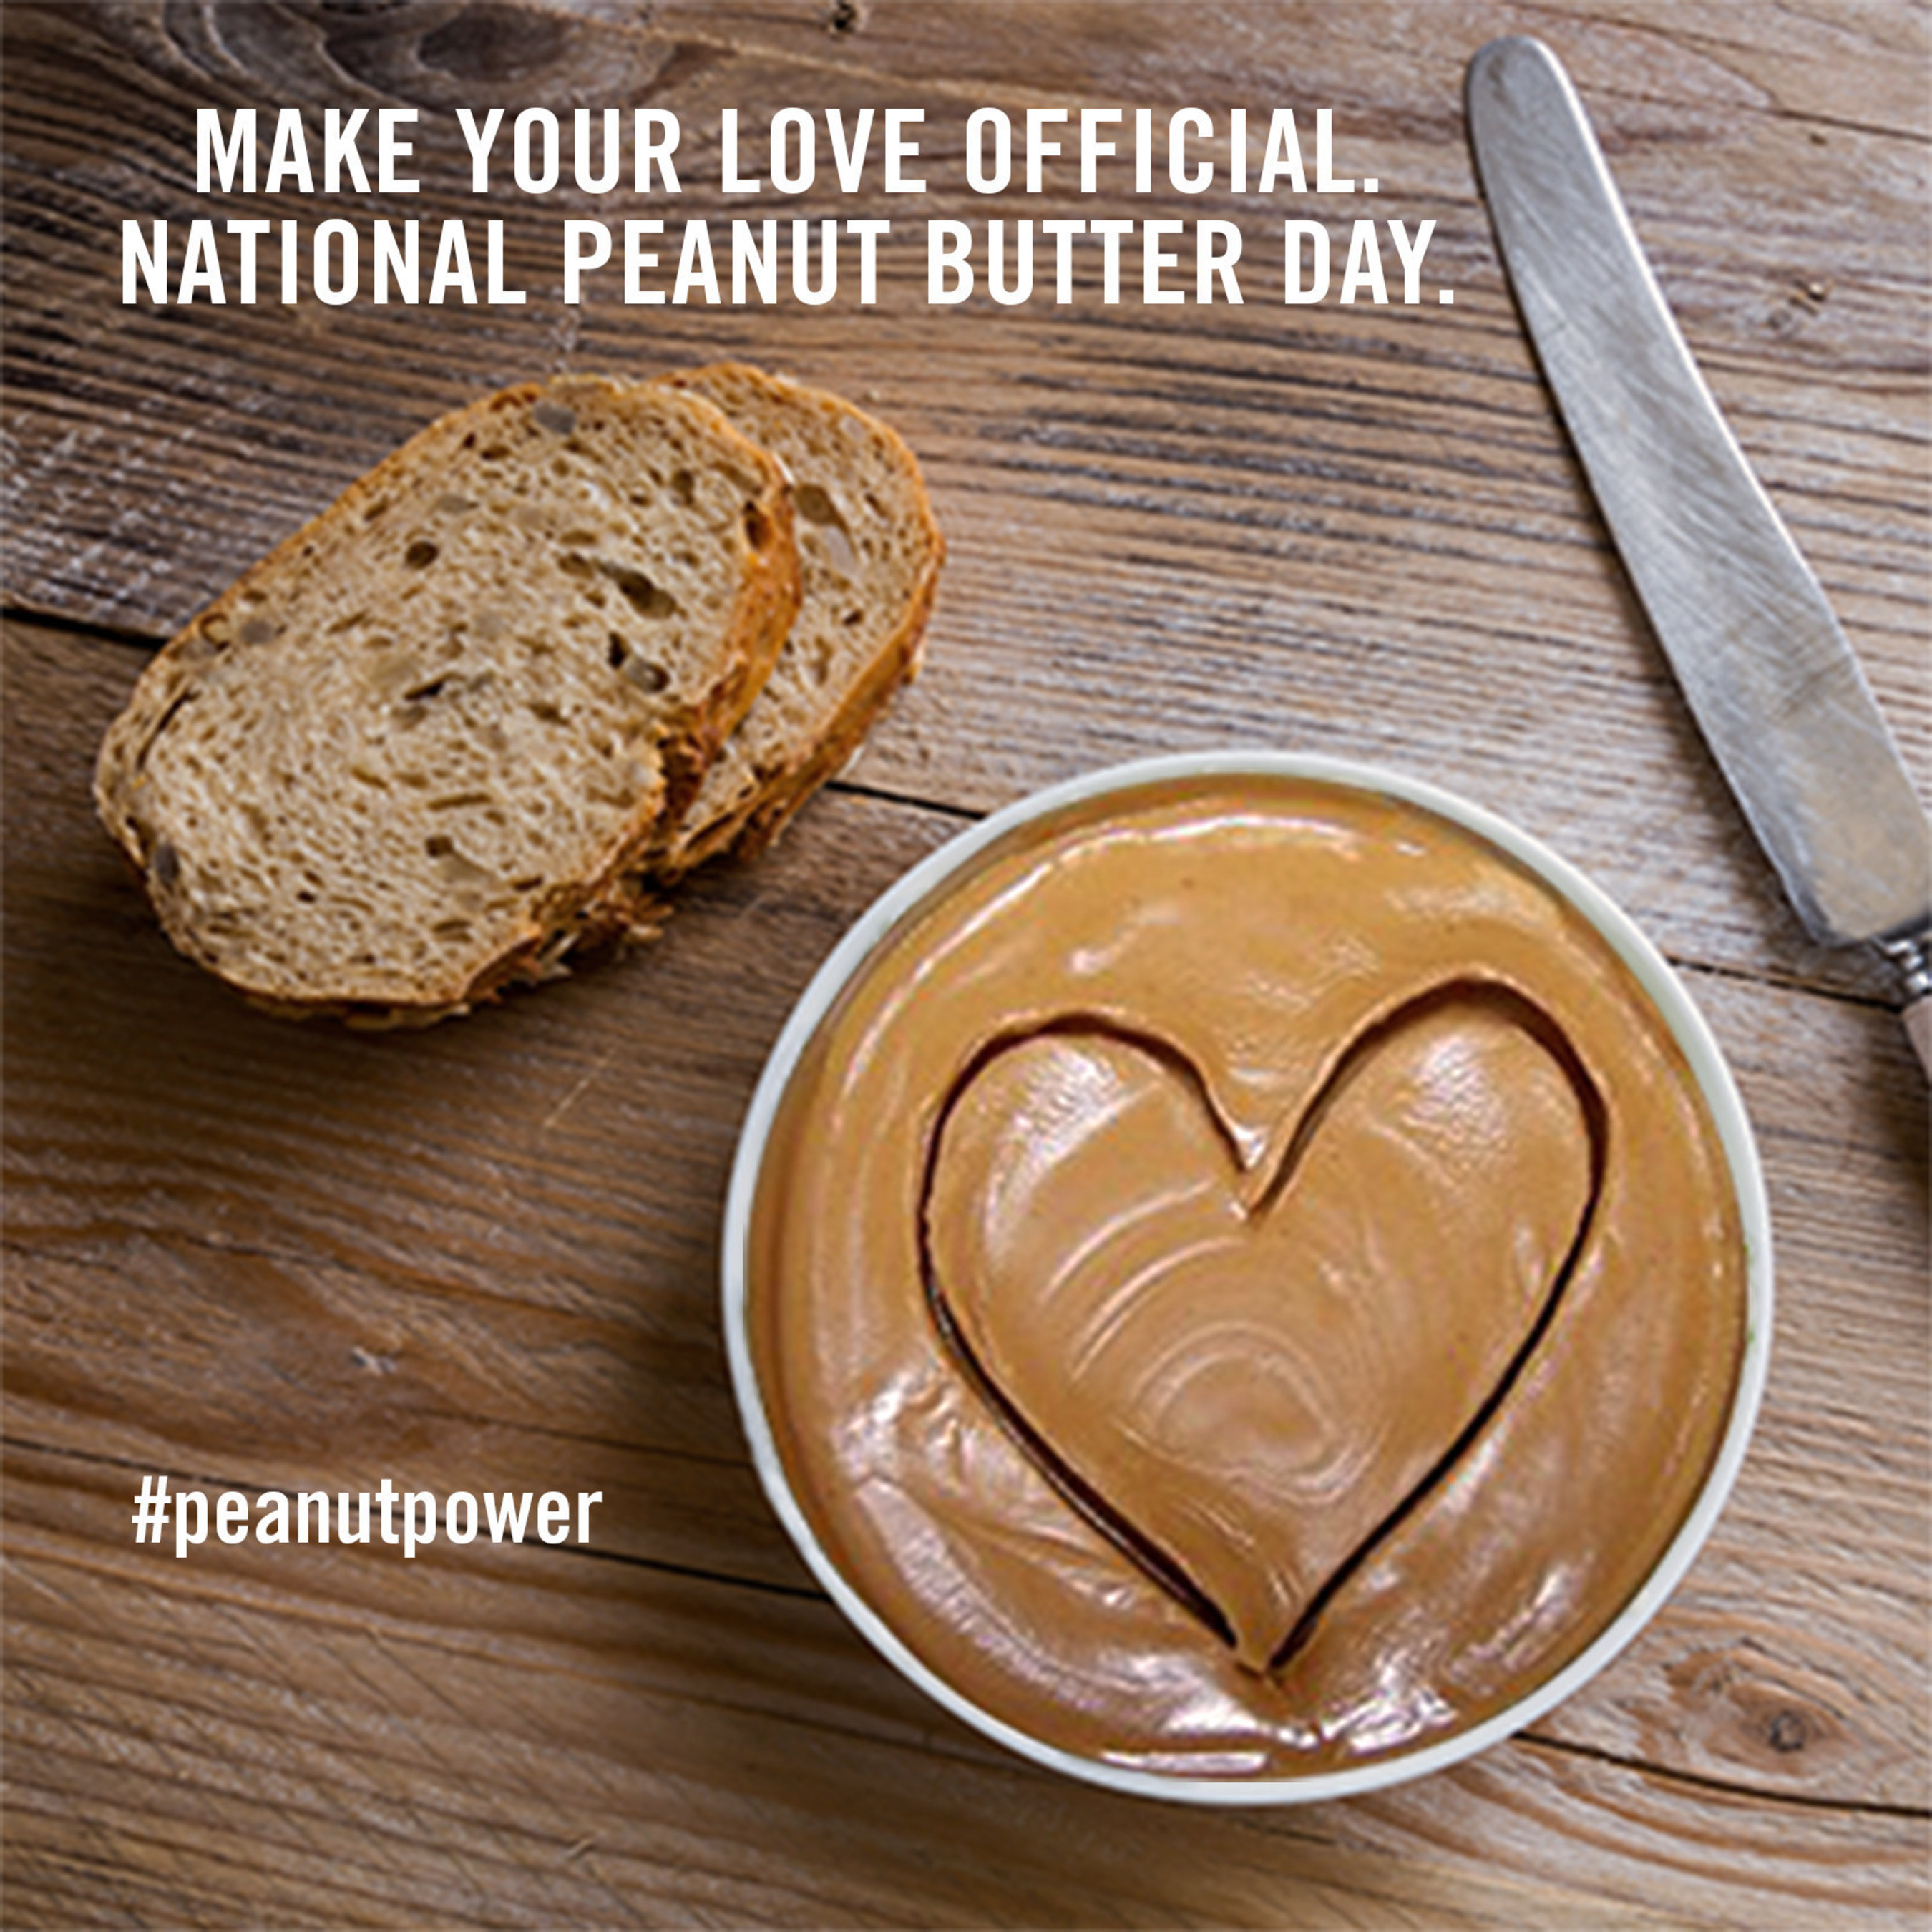 Happy National Peanut Butter Day! #peanutpower